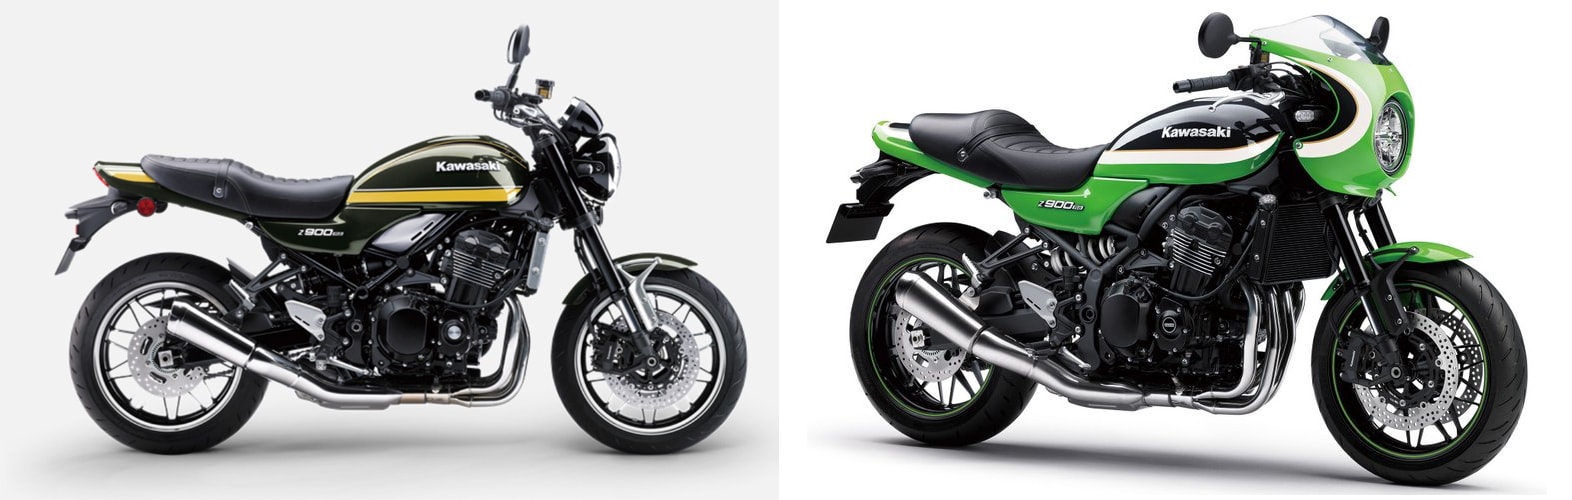 Z900RS และ Z900RS Cafe ปี 2020